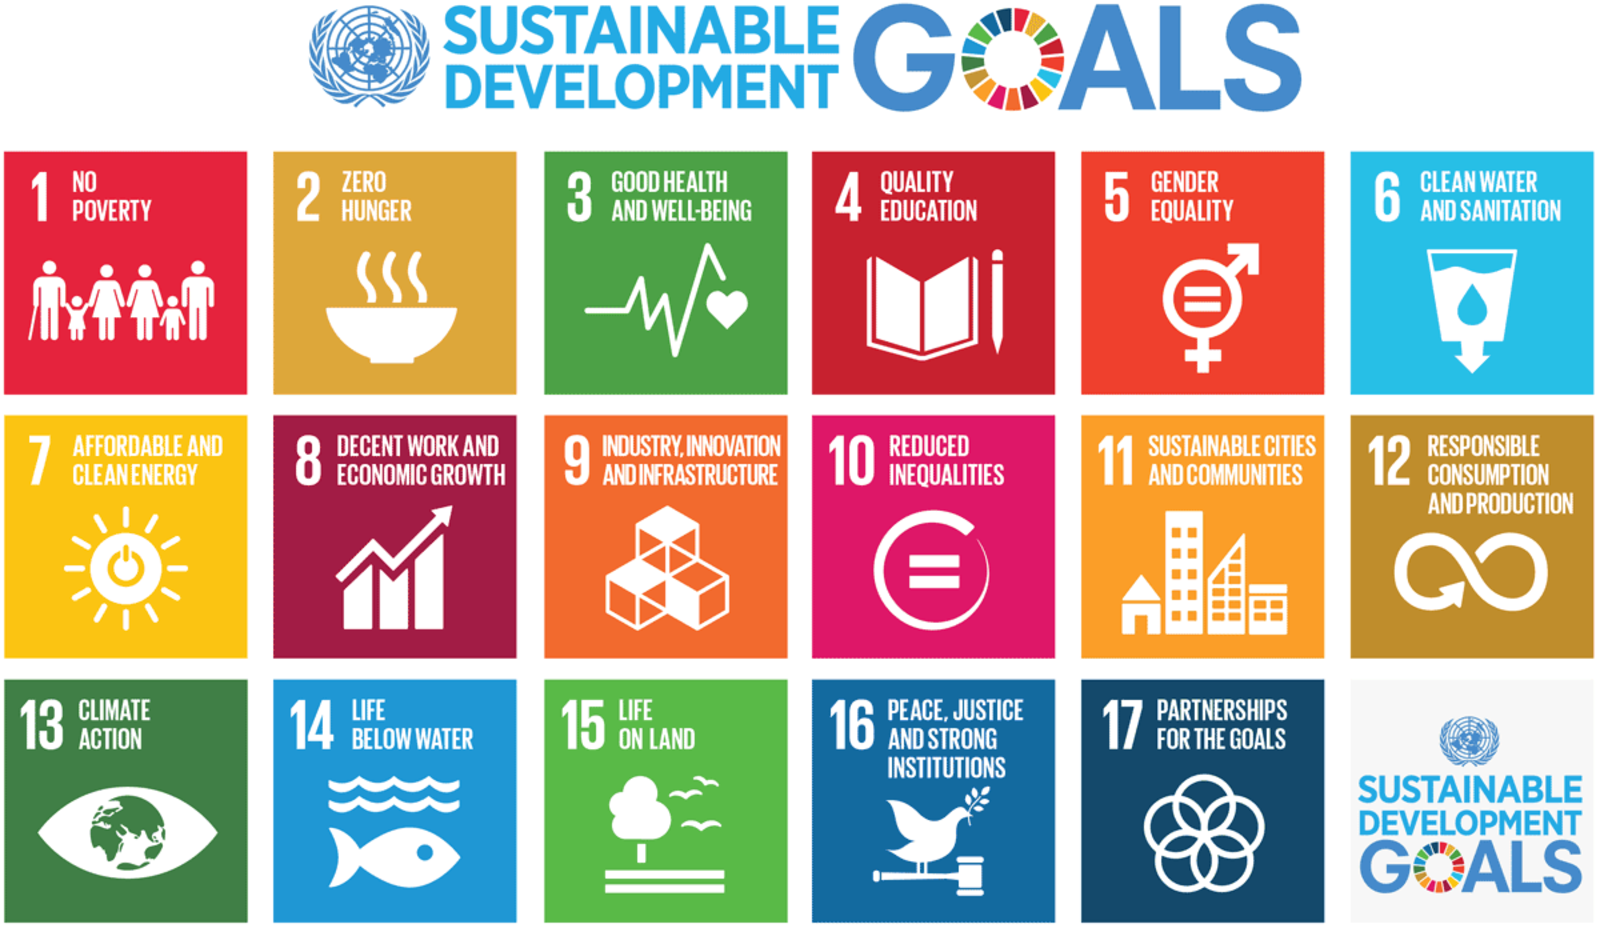 Fig 1: The Sustainable Development Goals